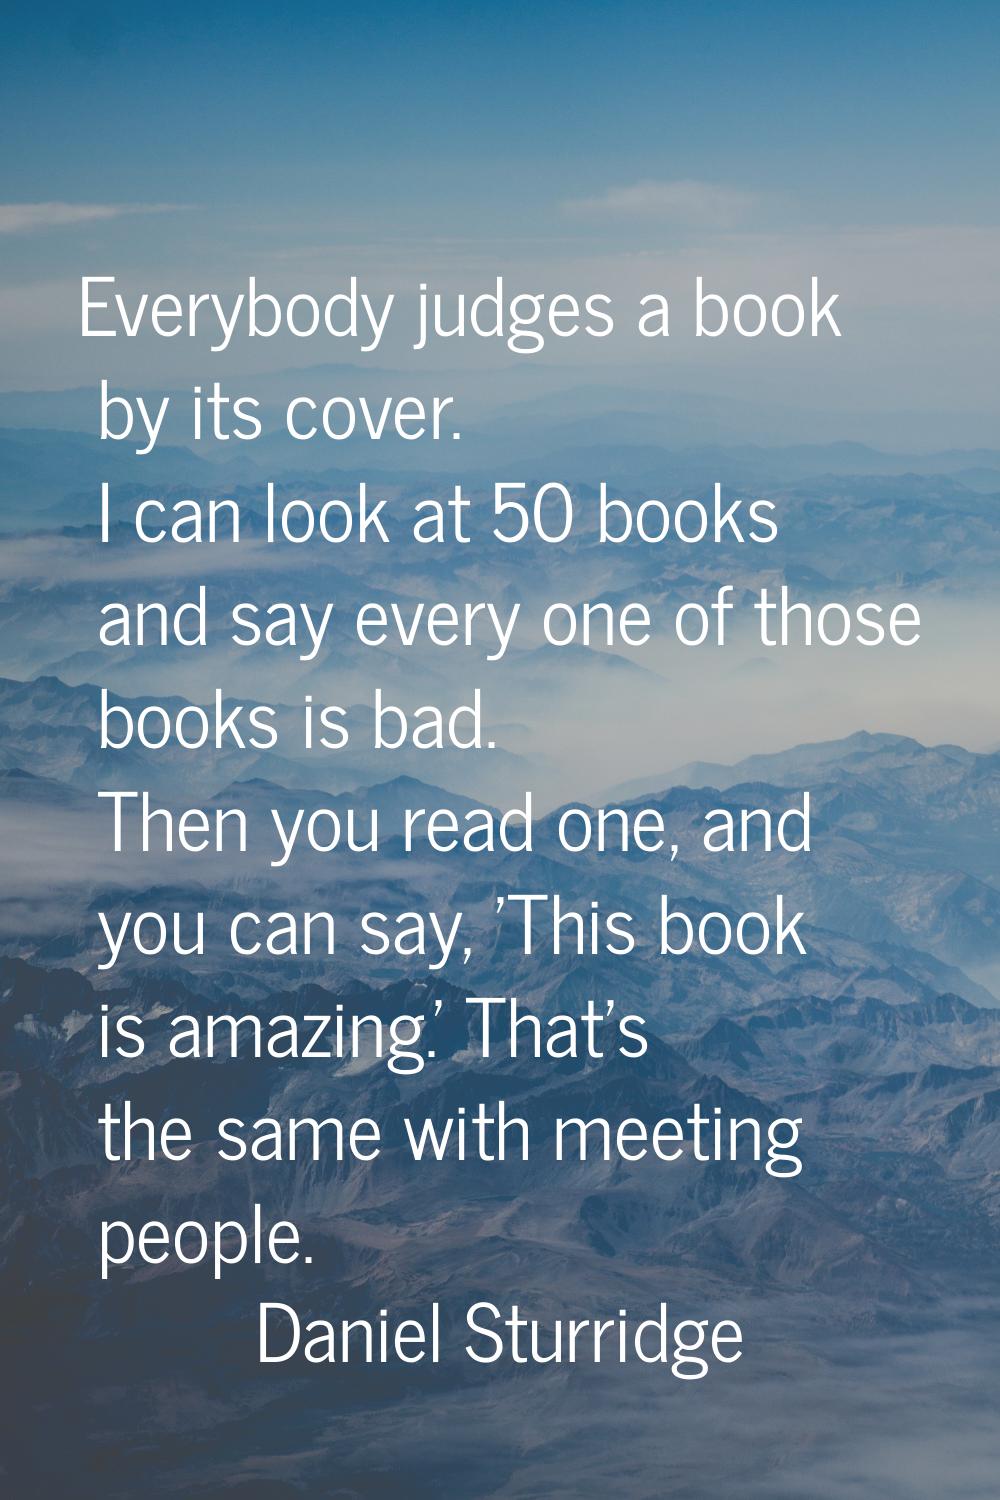 Everybody judges a book by its cover. I can look at 50 books and say every one of those books is ba